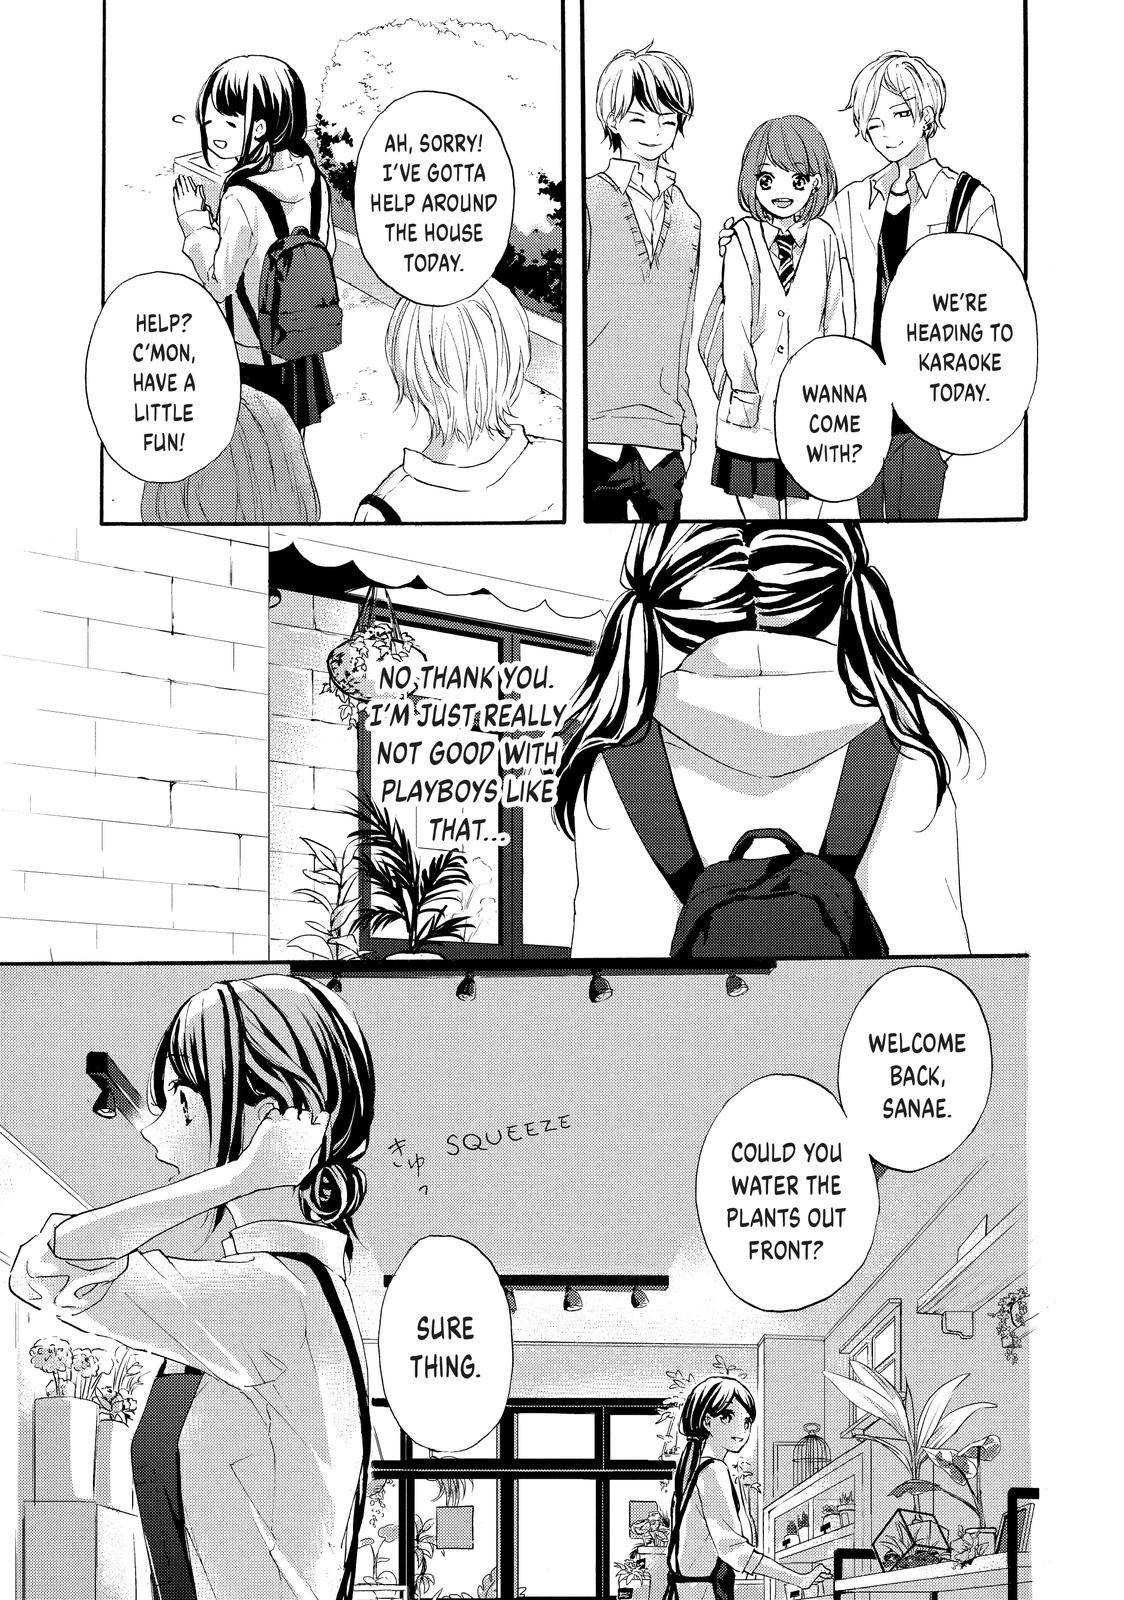 Chihiro-kun Only Has Eyes for Me - chapter 31.5 - #3